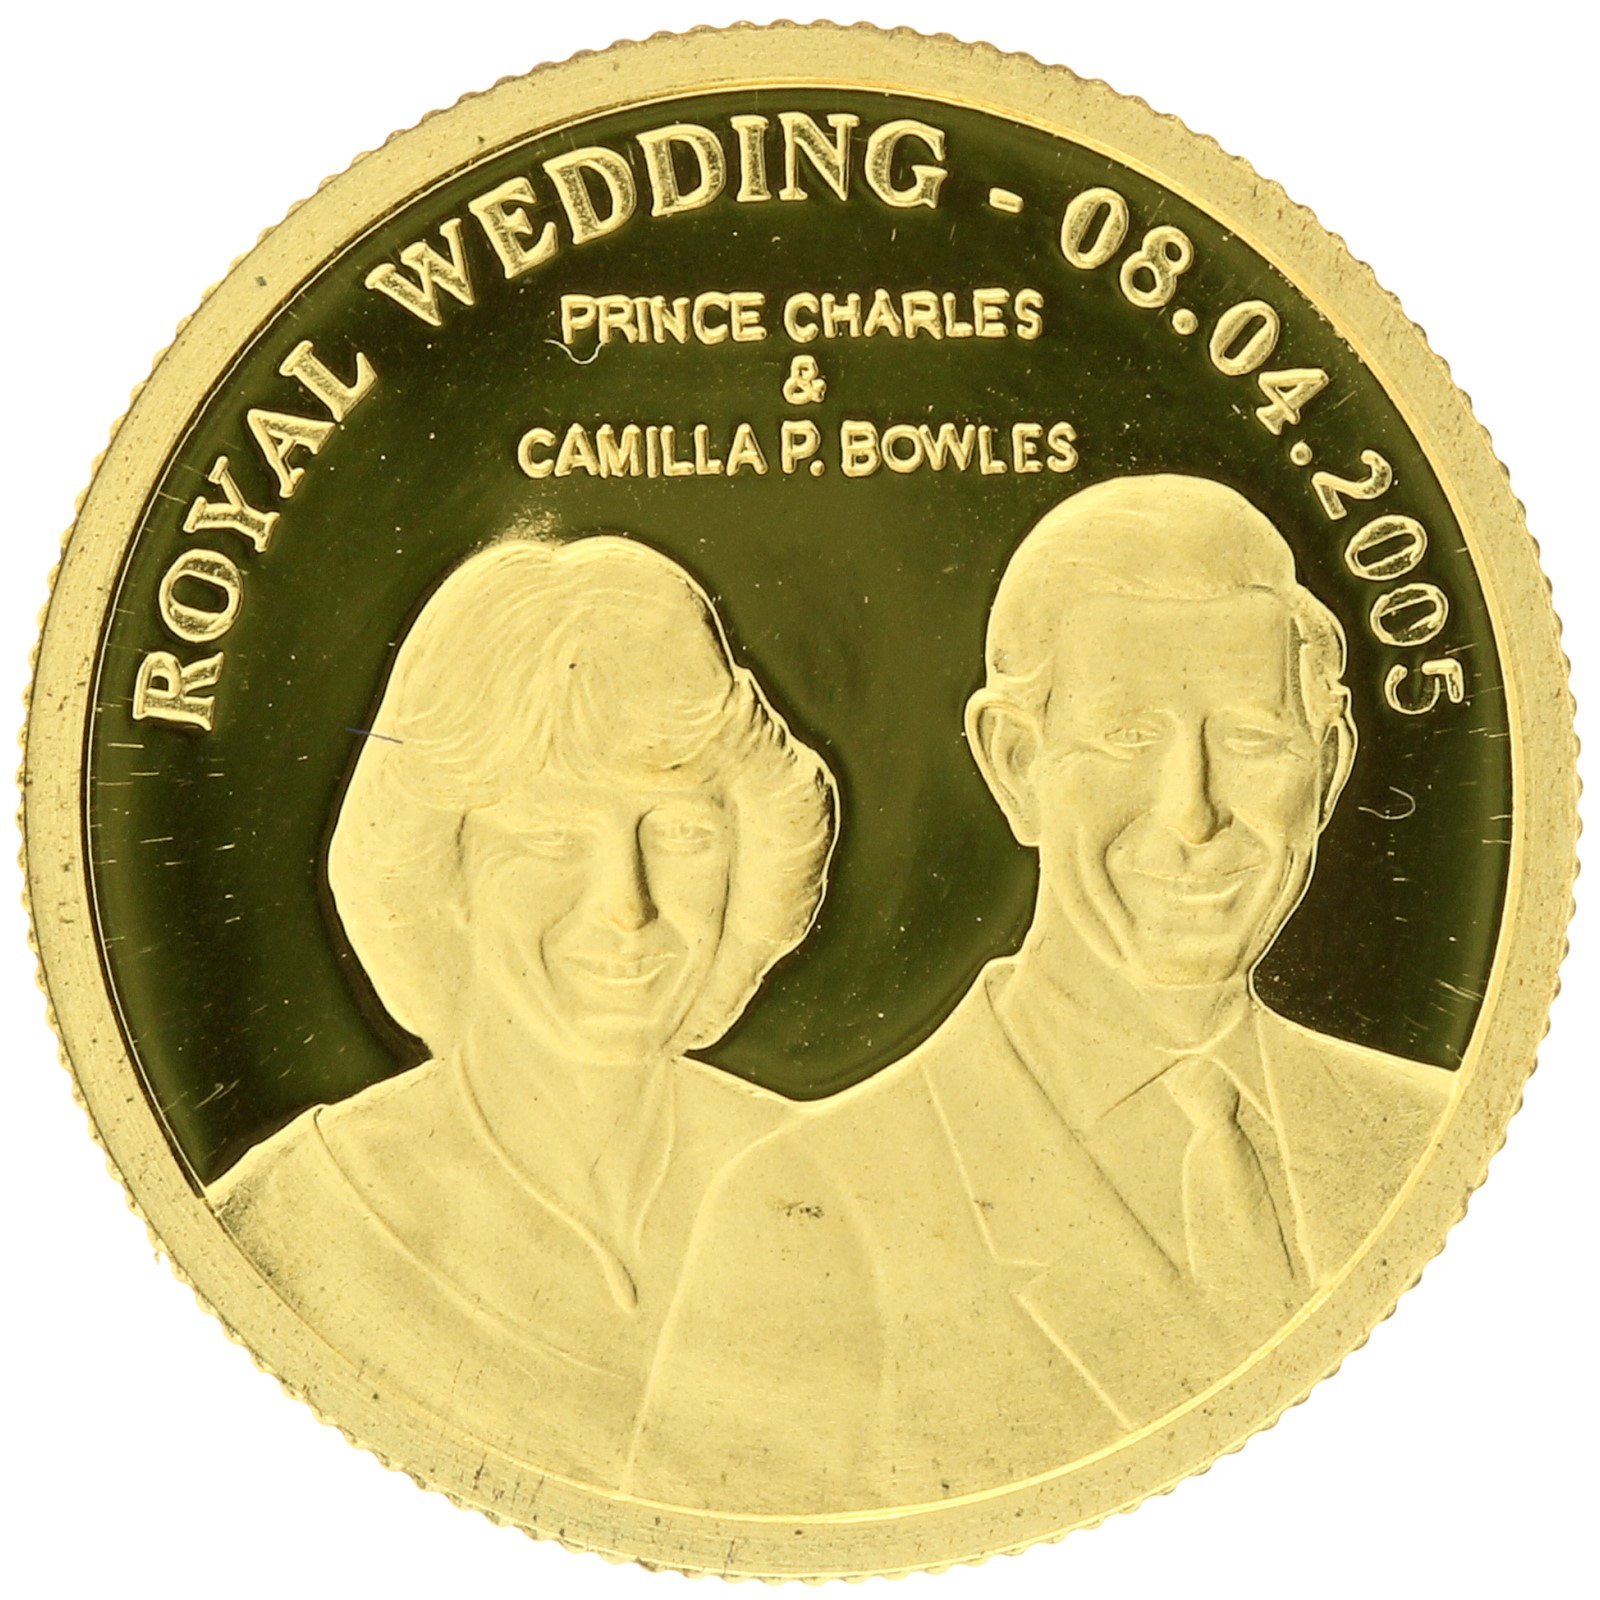 Cook islands - 10 Dollars - 2005 - Elizabeth II - Marriage of Prince Charles and Camilla Parker-Bowles - 1/25oz